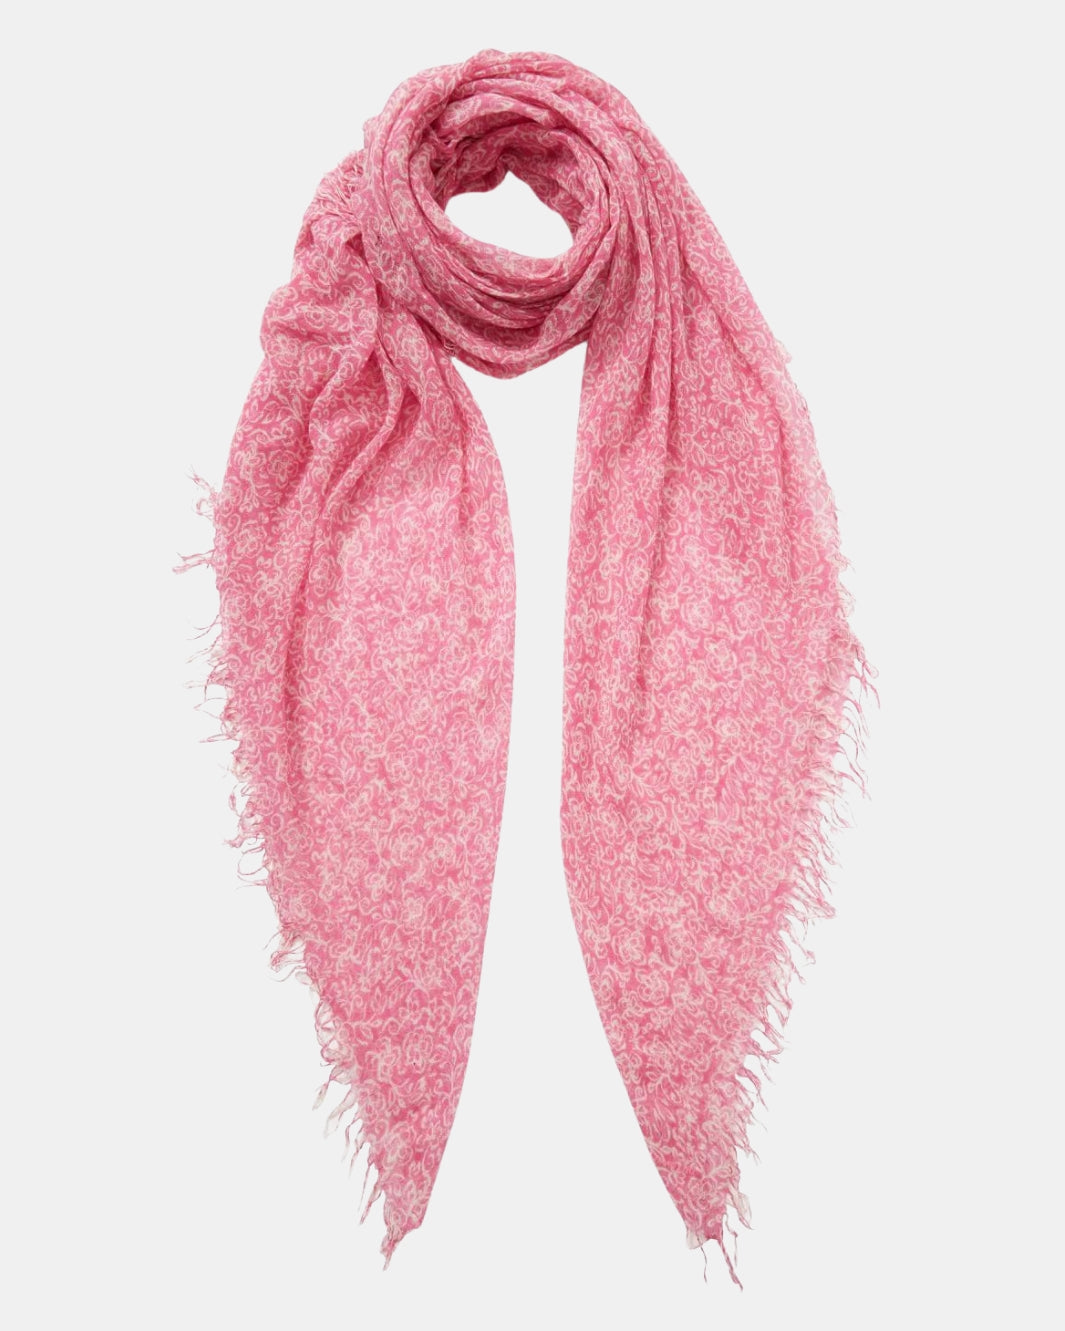 HIBISCUS FLORAL PRINT CASHMERE AND SILK SCARF IN SACHET PINK - Romi Boutique